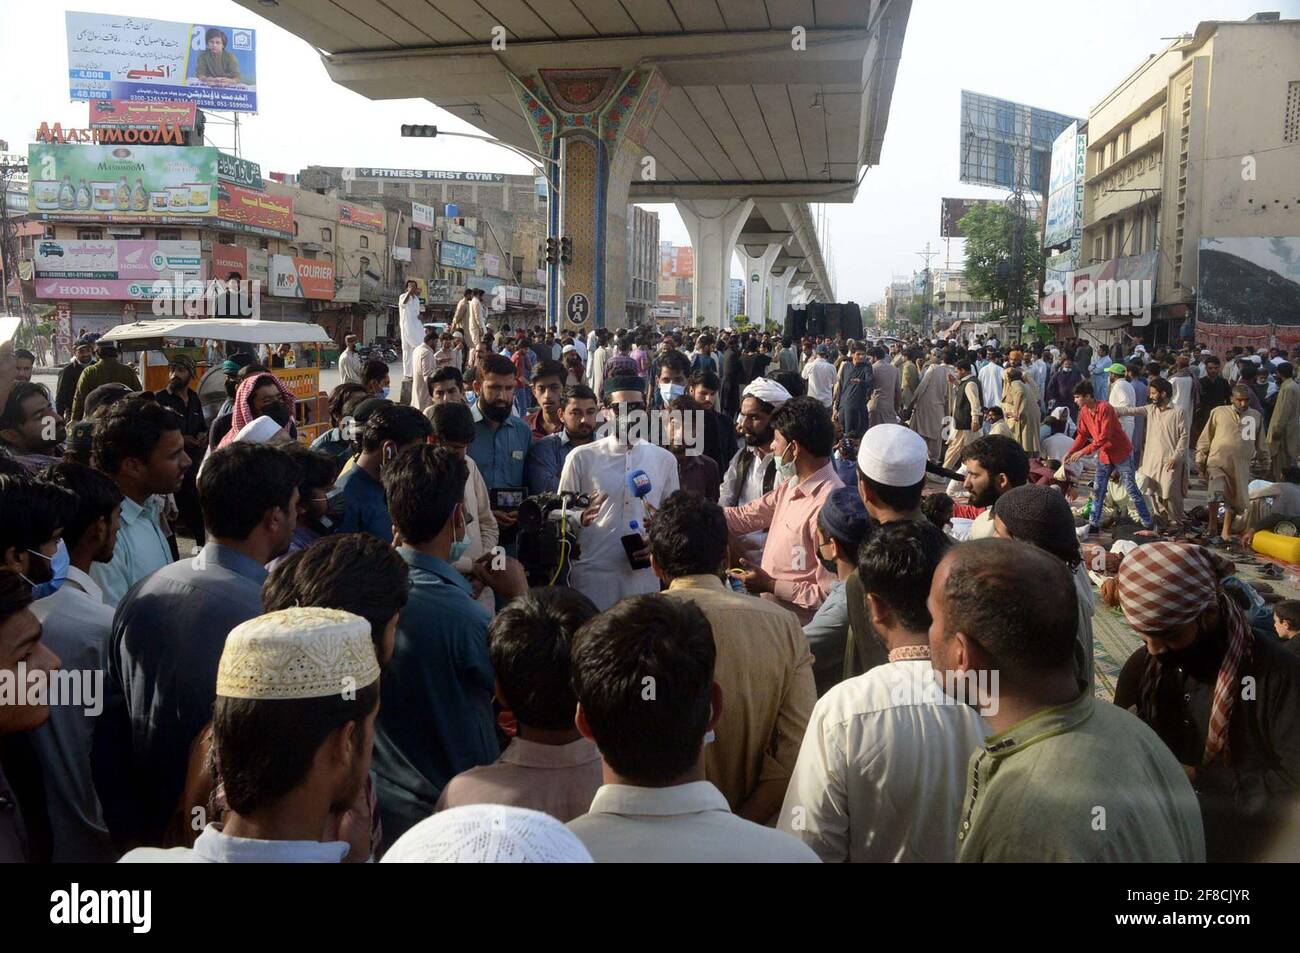 Leaders and activists of Tehreek-e-Labbaik (TLP) block road as they are holding protest demonstration against arrested of Saad Hussain Rizvi, Chief of Tehreek-e-Labbaik Pakistan (TLP) son of late cleric Khadim Hussain Rizvi, at Murree road in Rawalpindi on Tuesday, April 13, 2021. Stock Photo